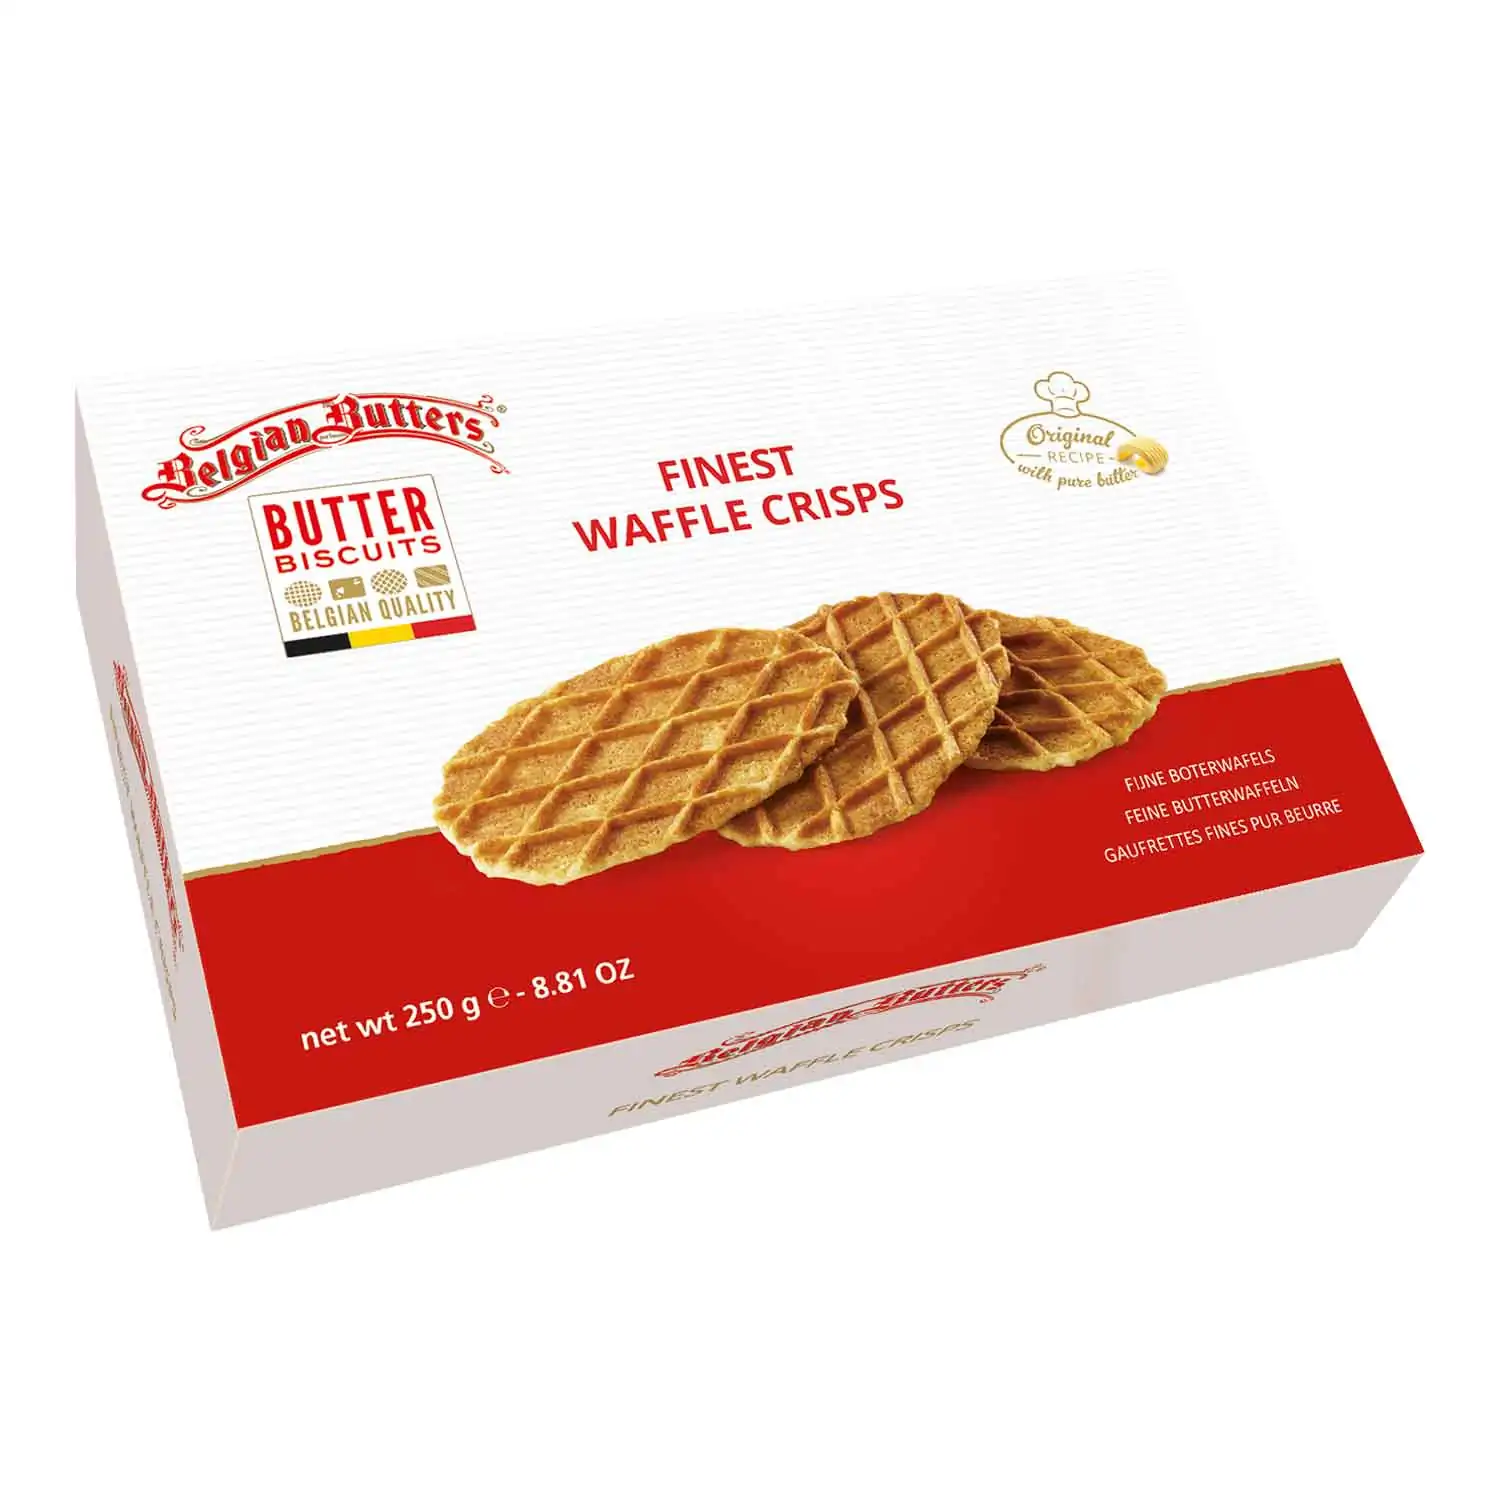 BB finest waffle crisps 250g - Buy at Real Tobacco